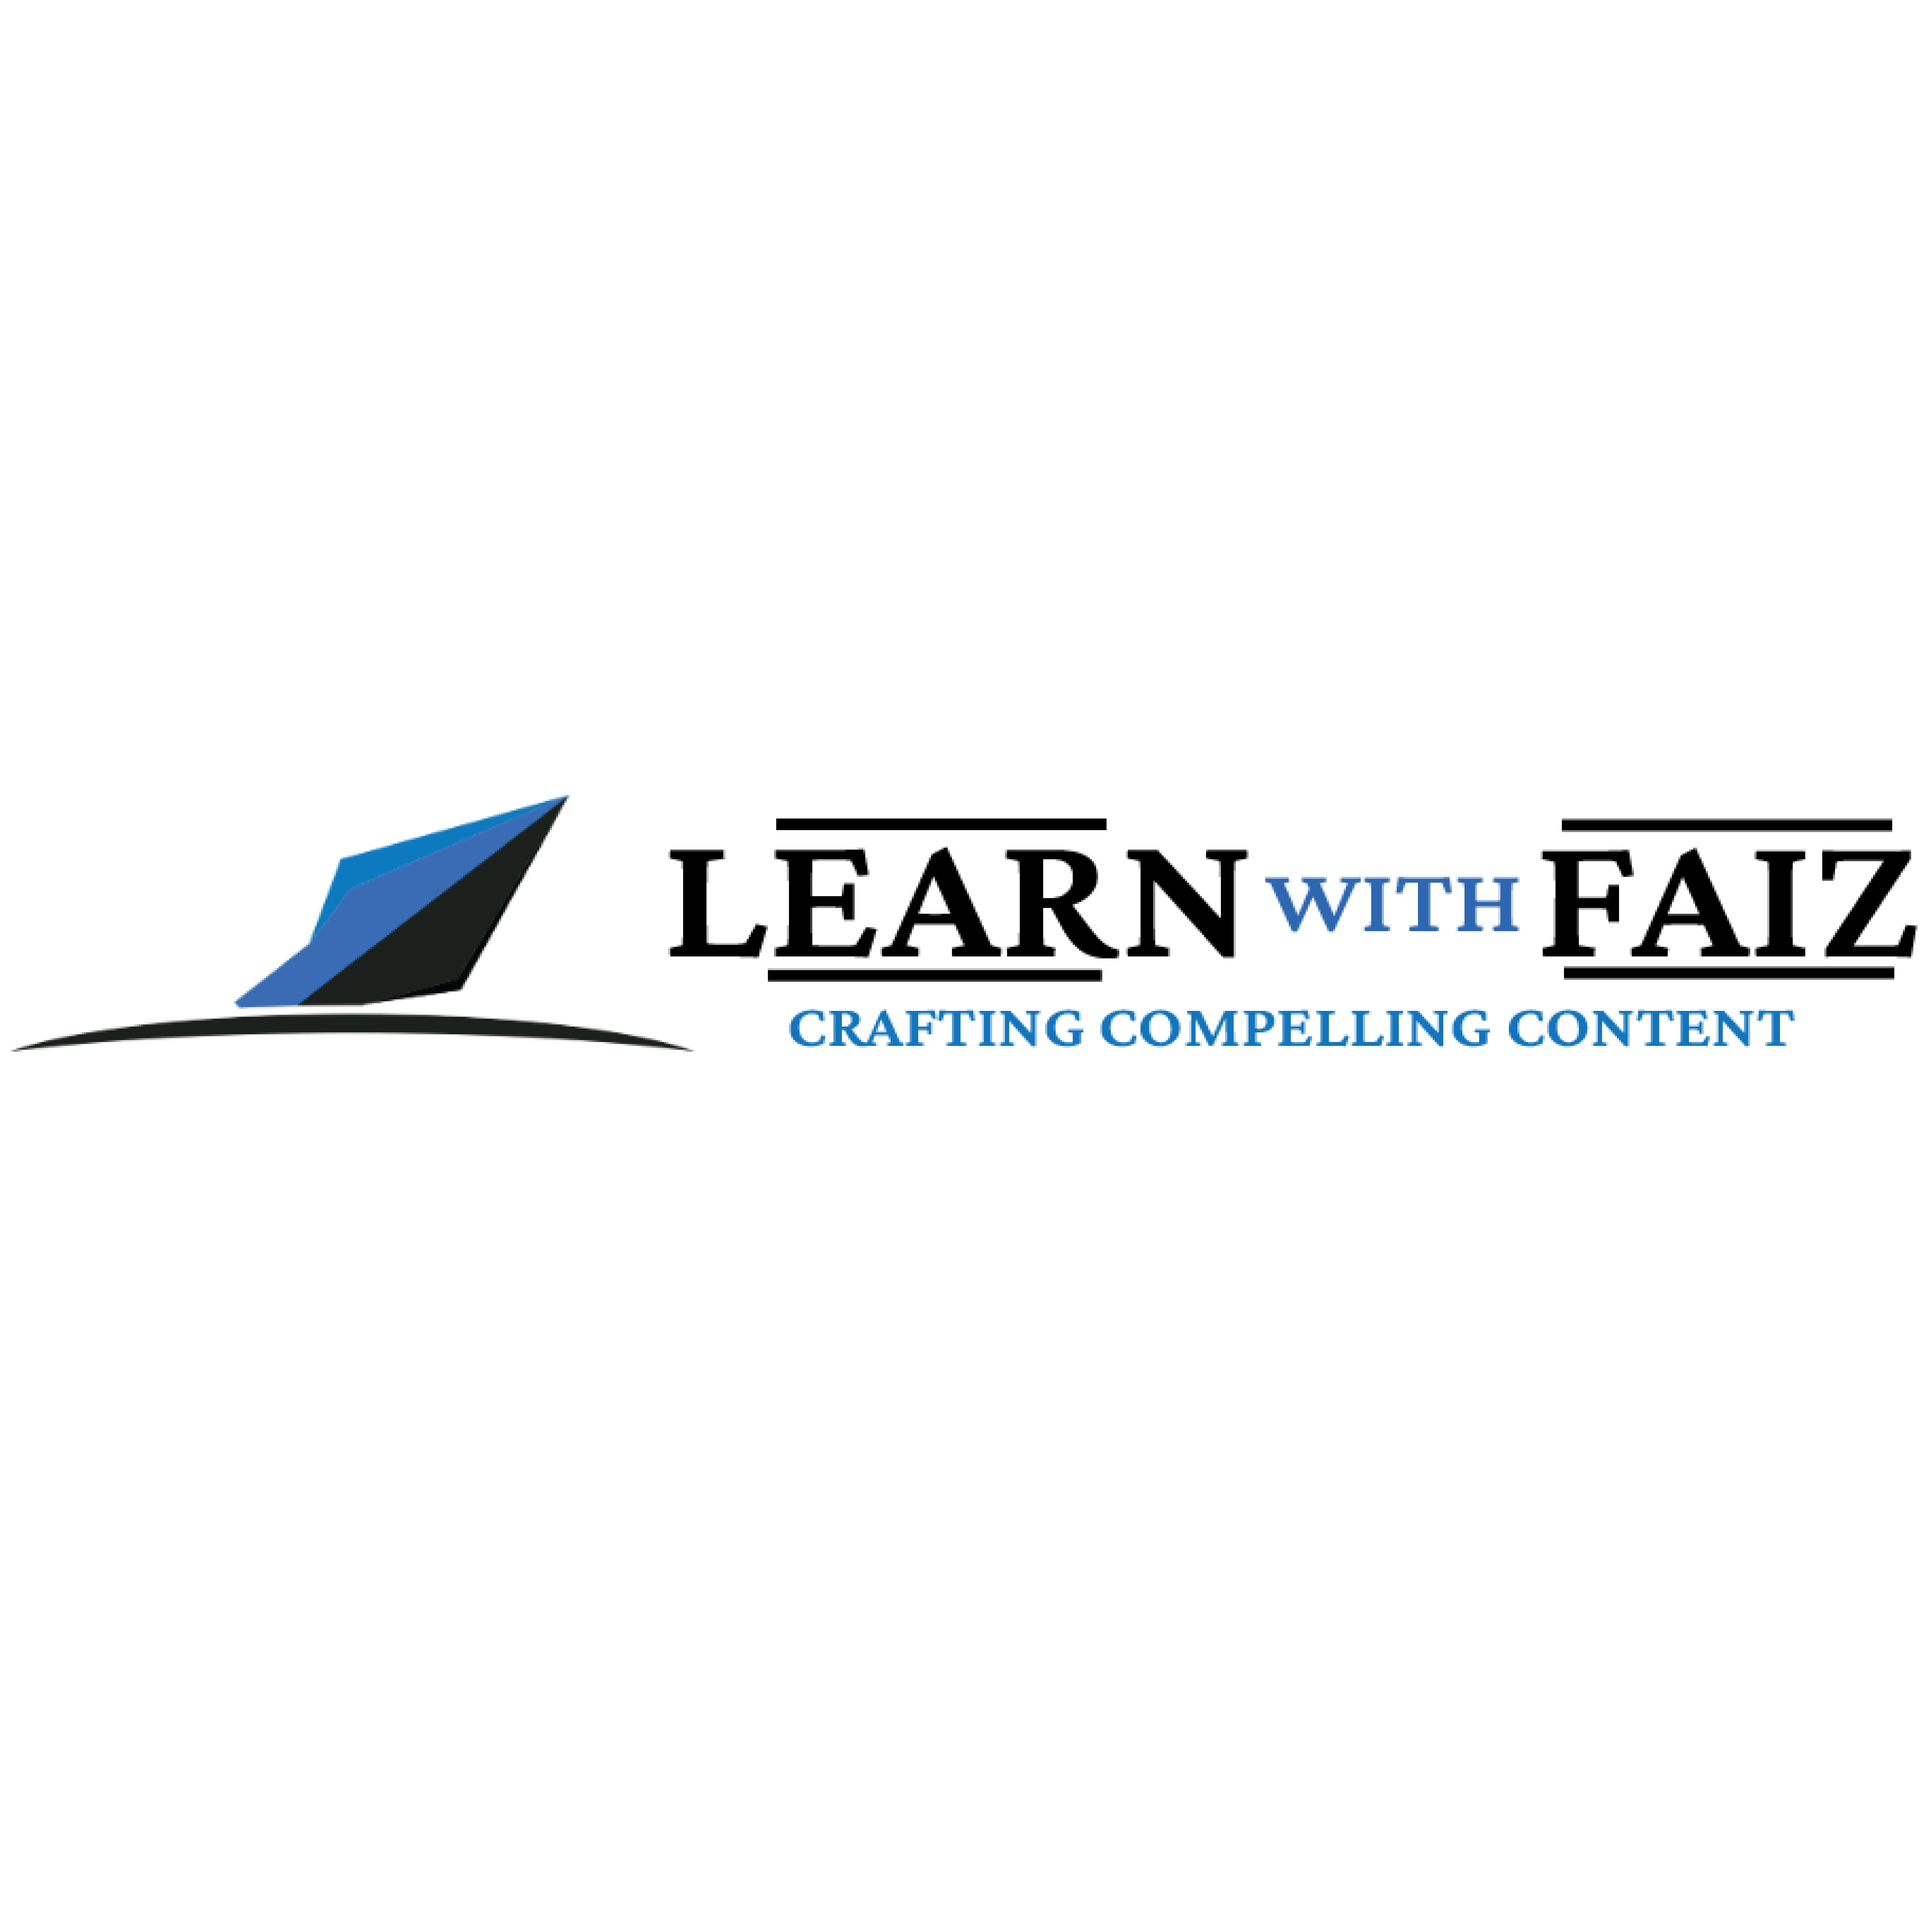 Resume Writing Services - LearnwithFaiz